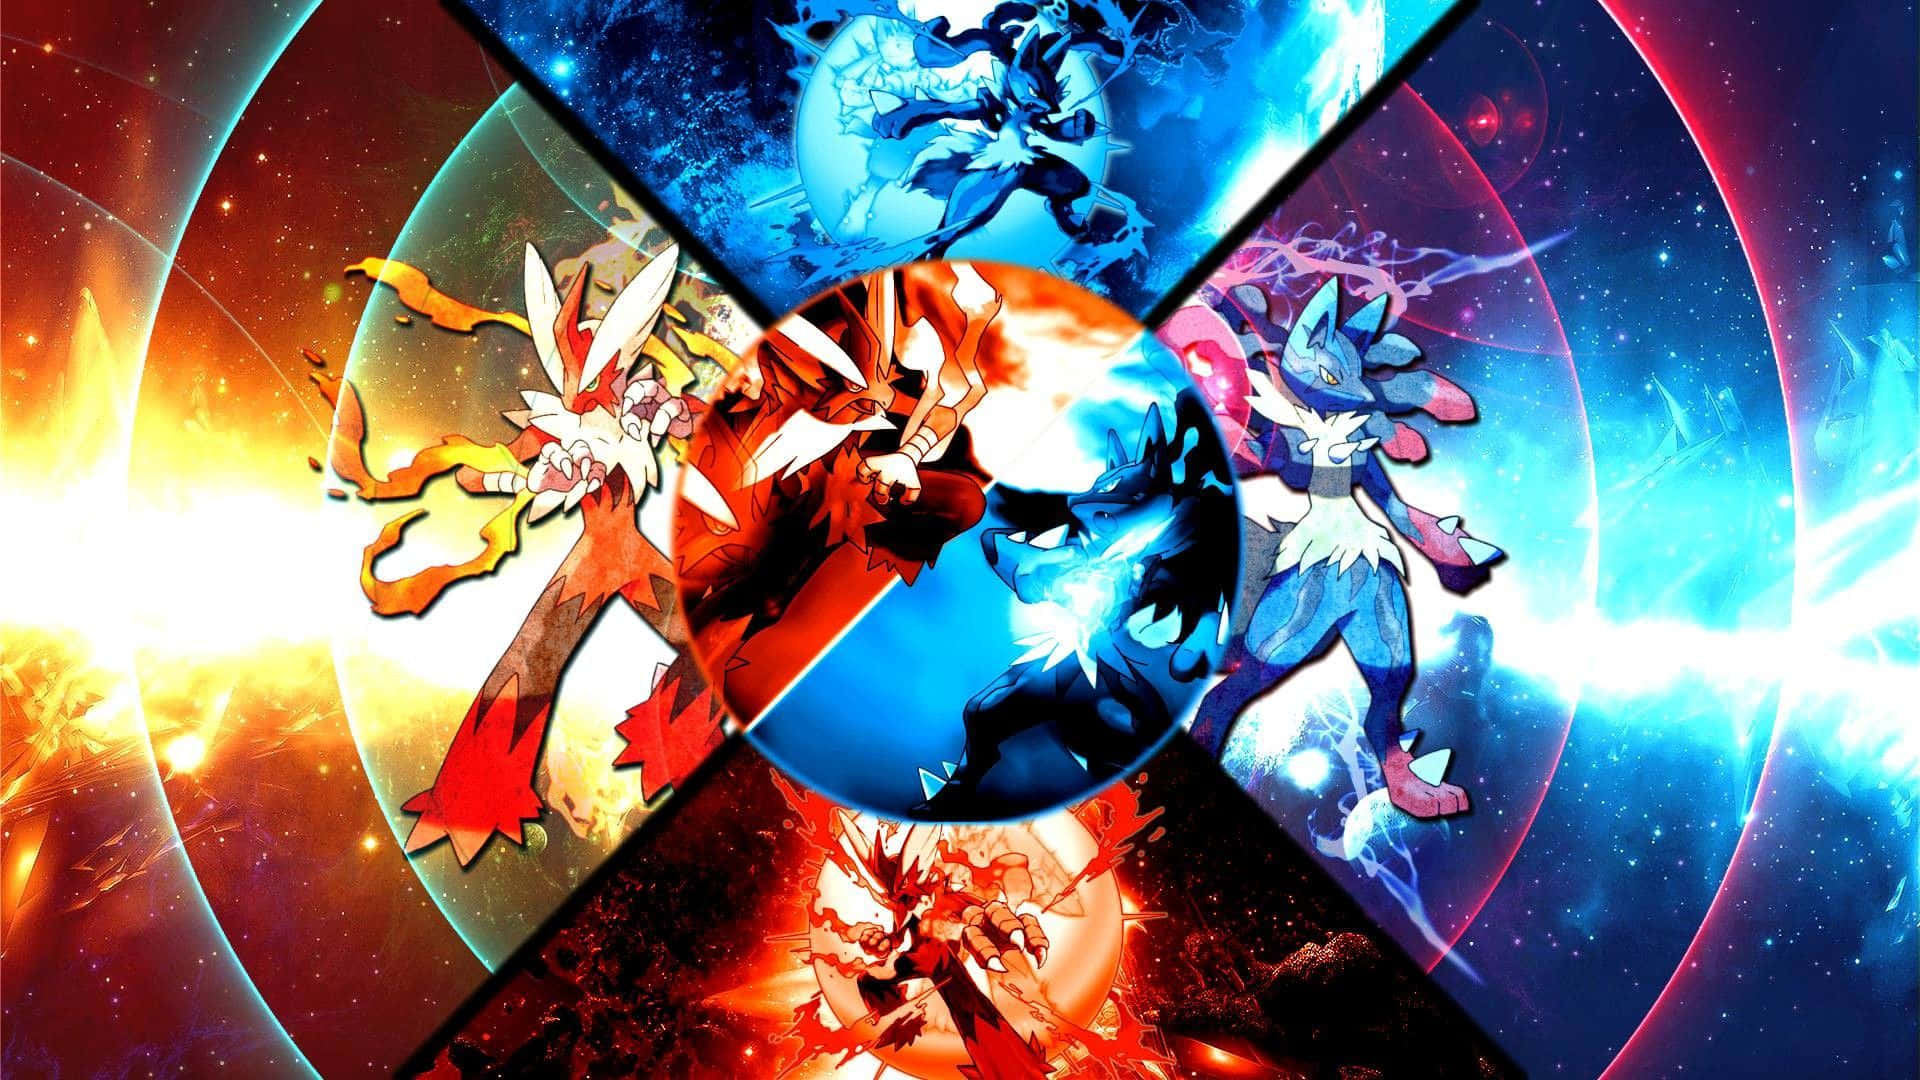 Pokémon X and Y to offer Mega Evolution Pokémon for download this